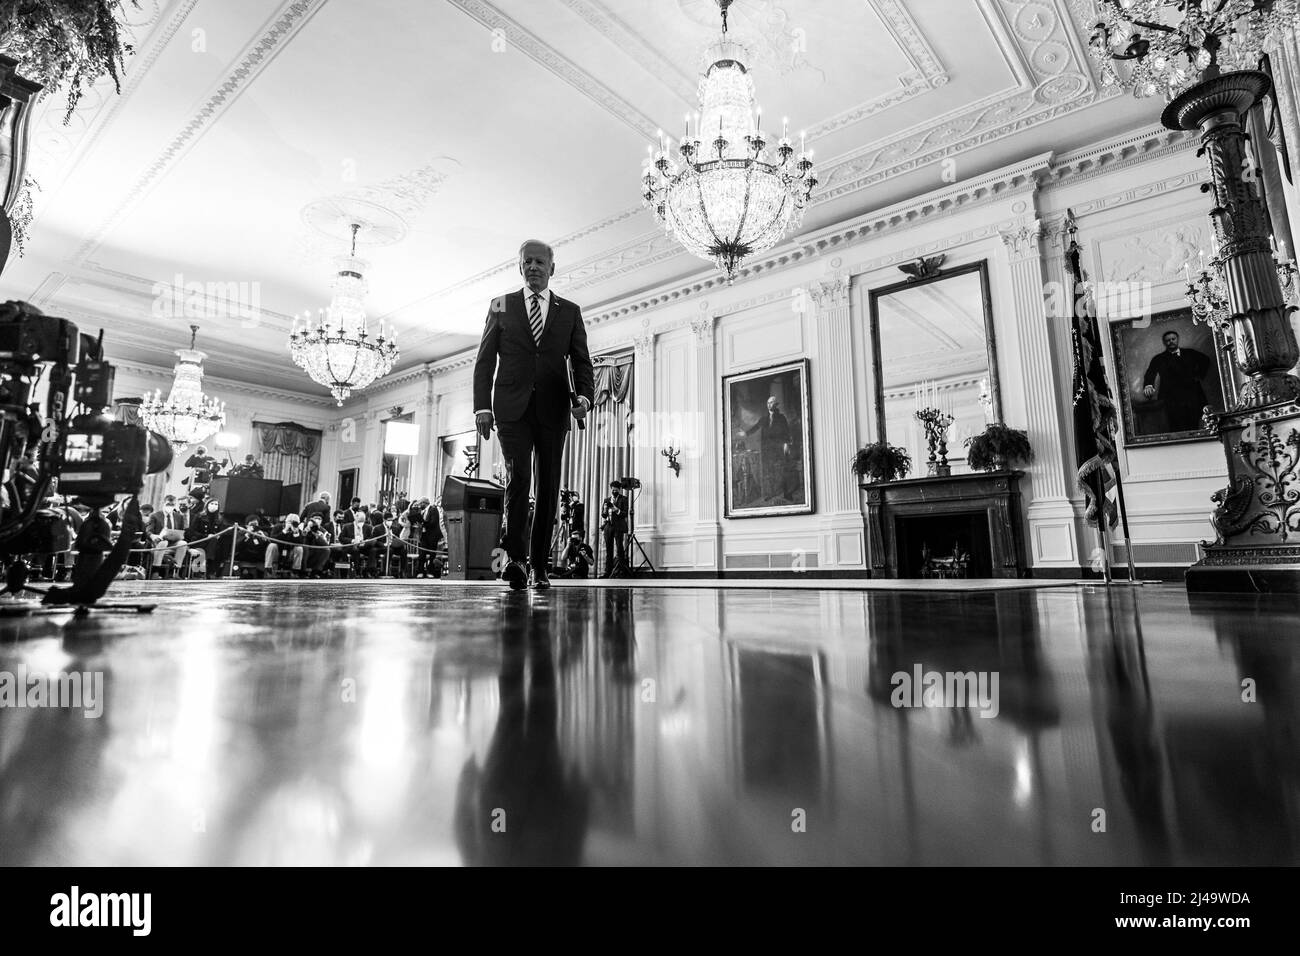 President Joe Biden departs after delivering remarks on the Russian invasion of Ukraine, Thursday, February 24, 2022, in the East Room of the White House.  (Official White House Photo by Adam Schultz) Stock Photo